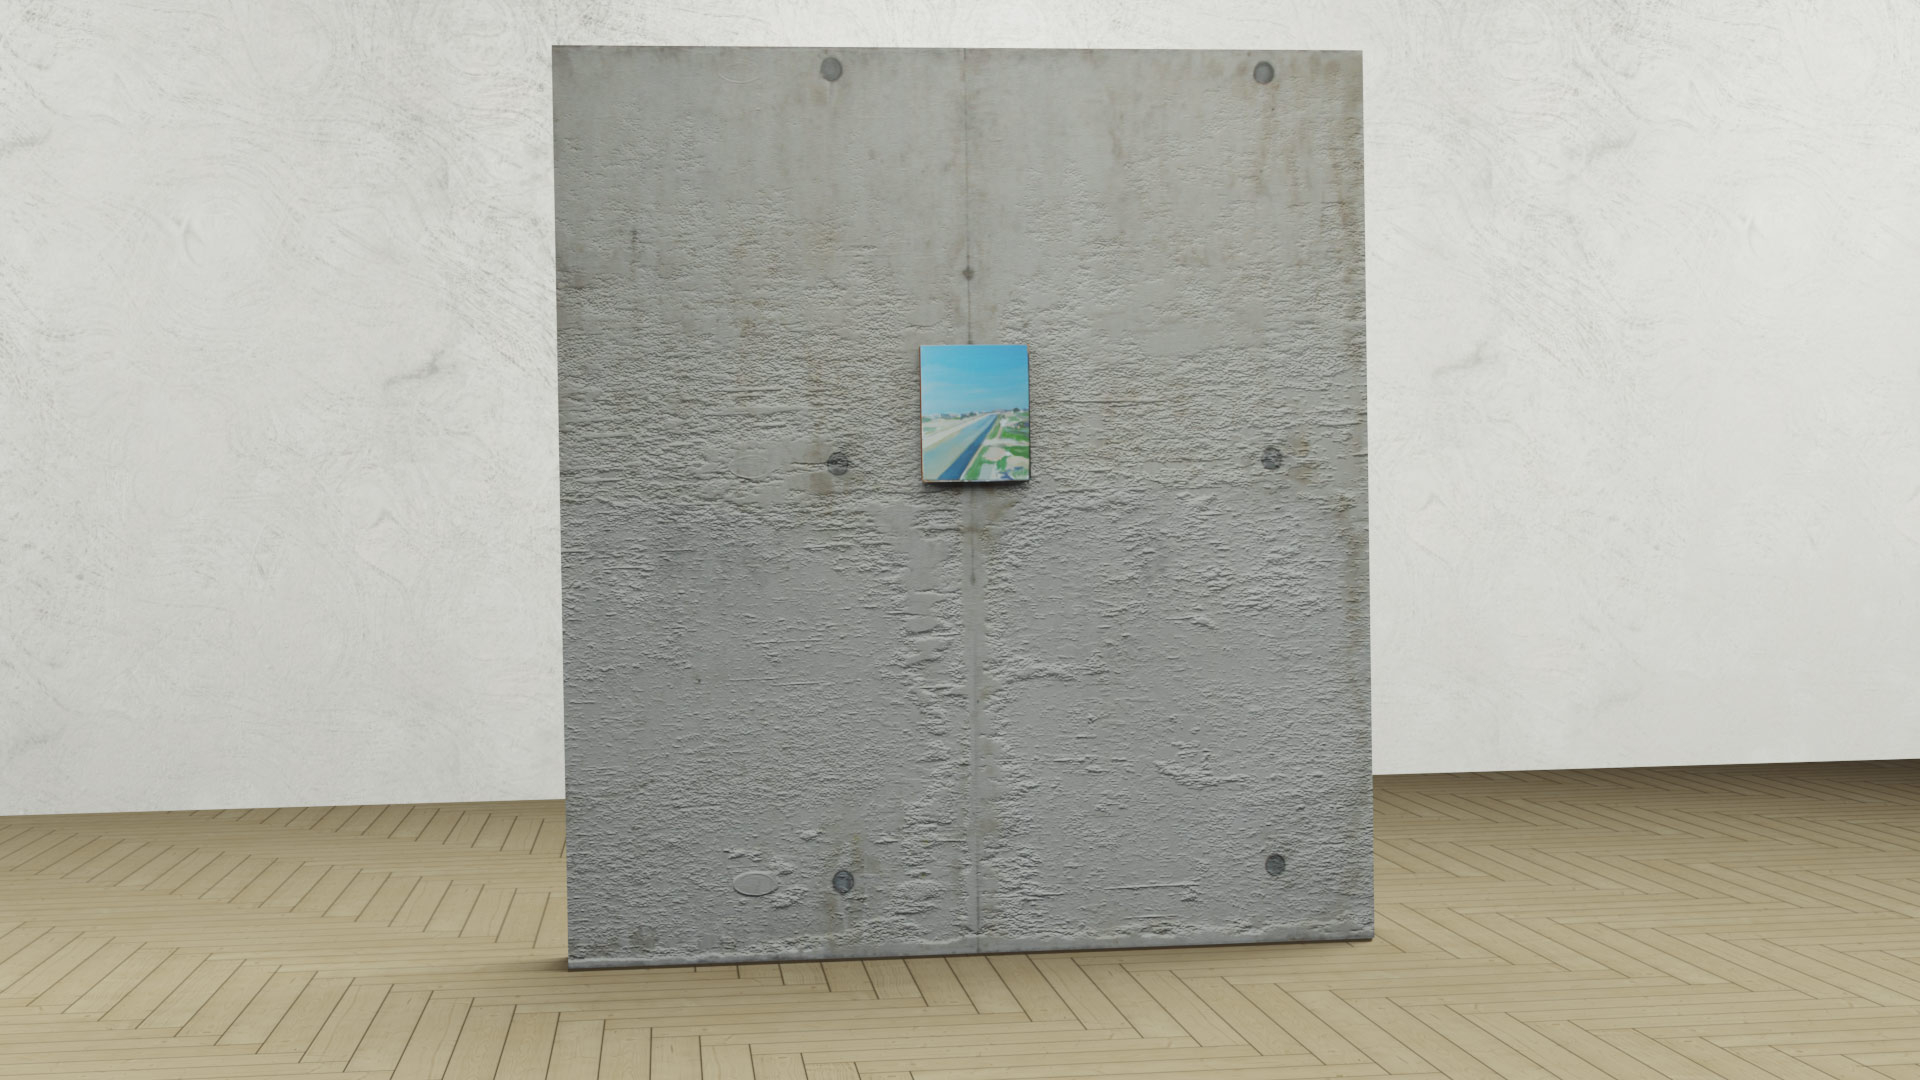 Image of a concrete block with a painting in the middle.